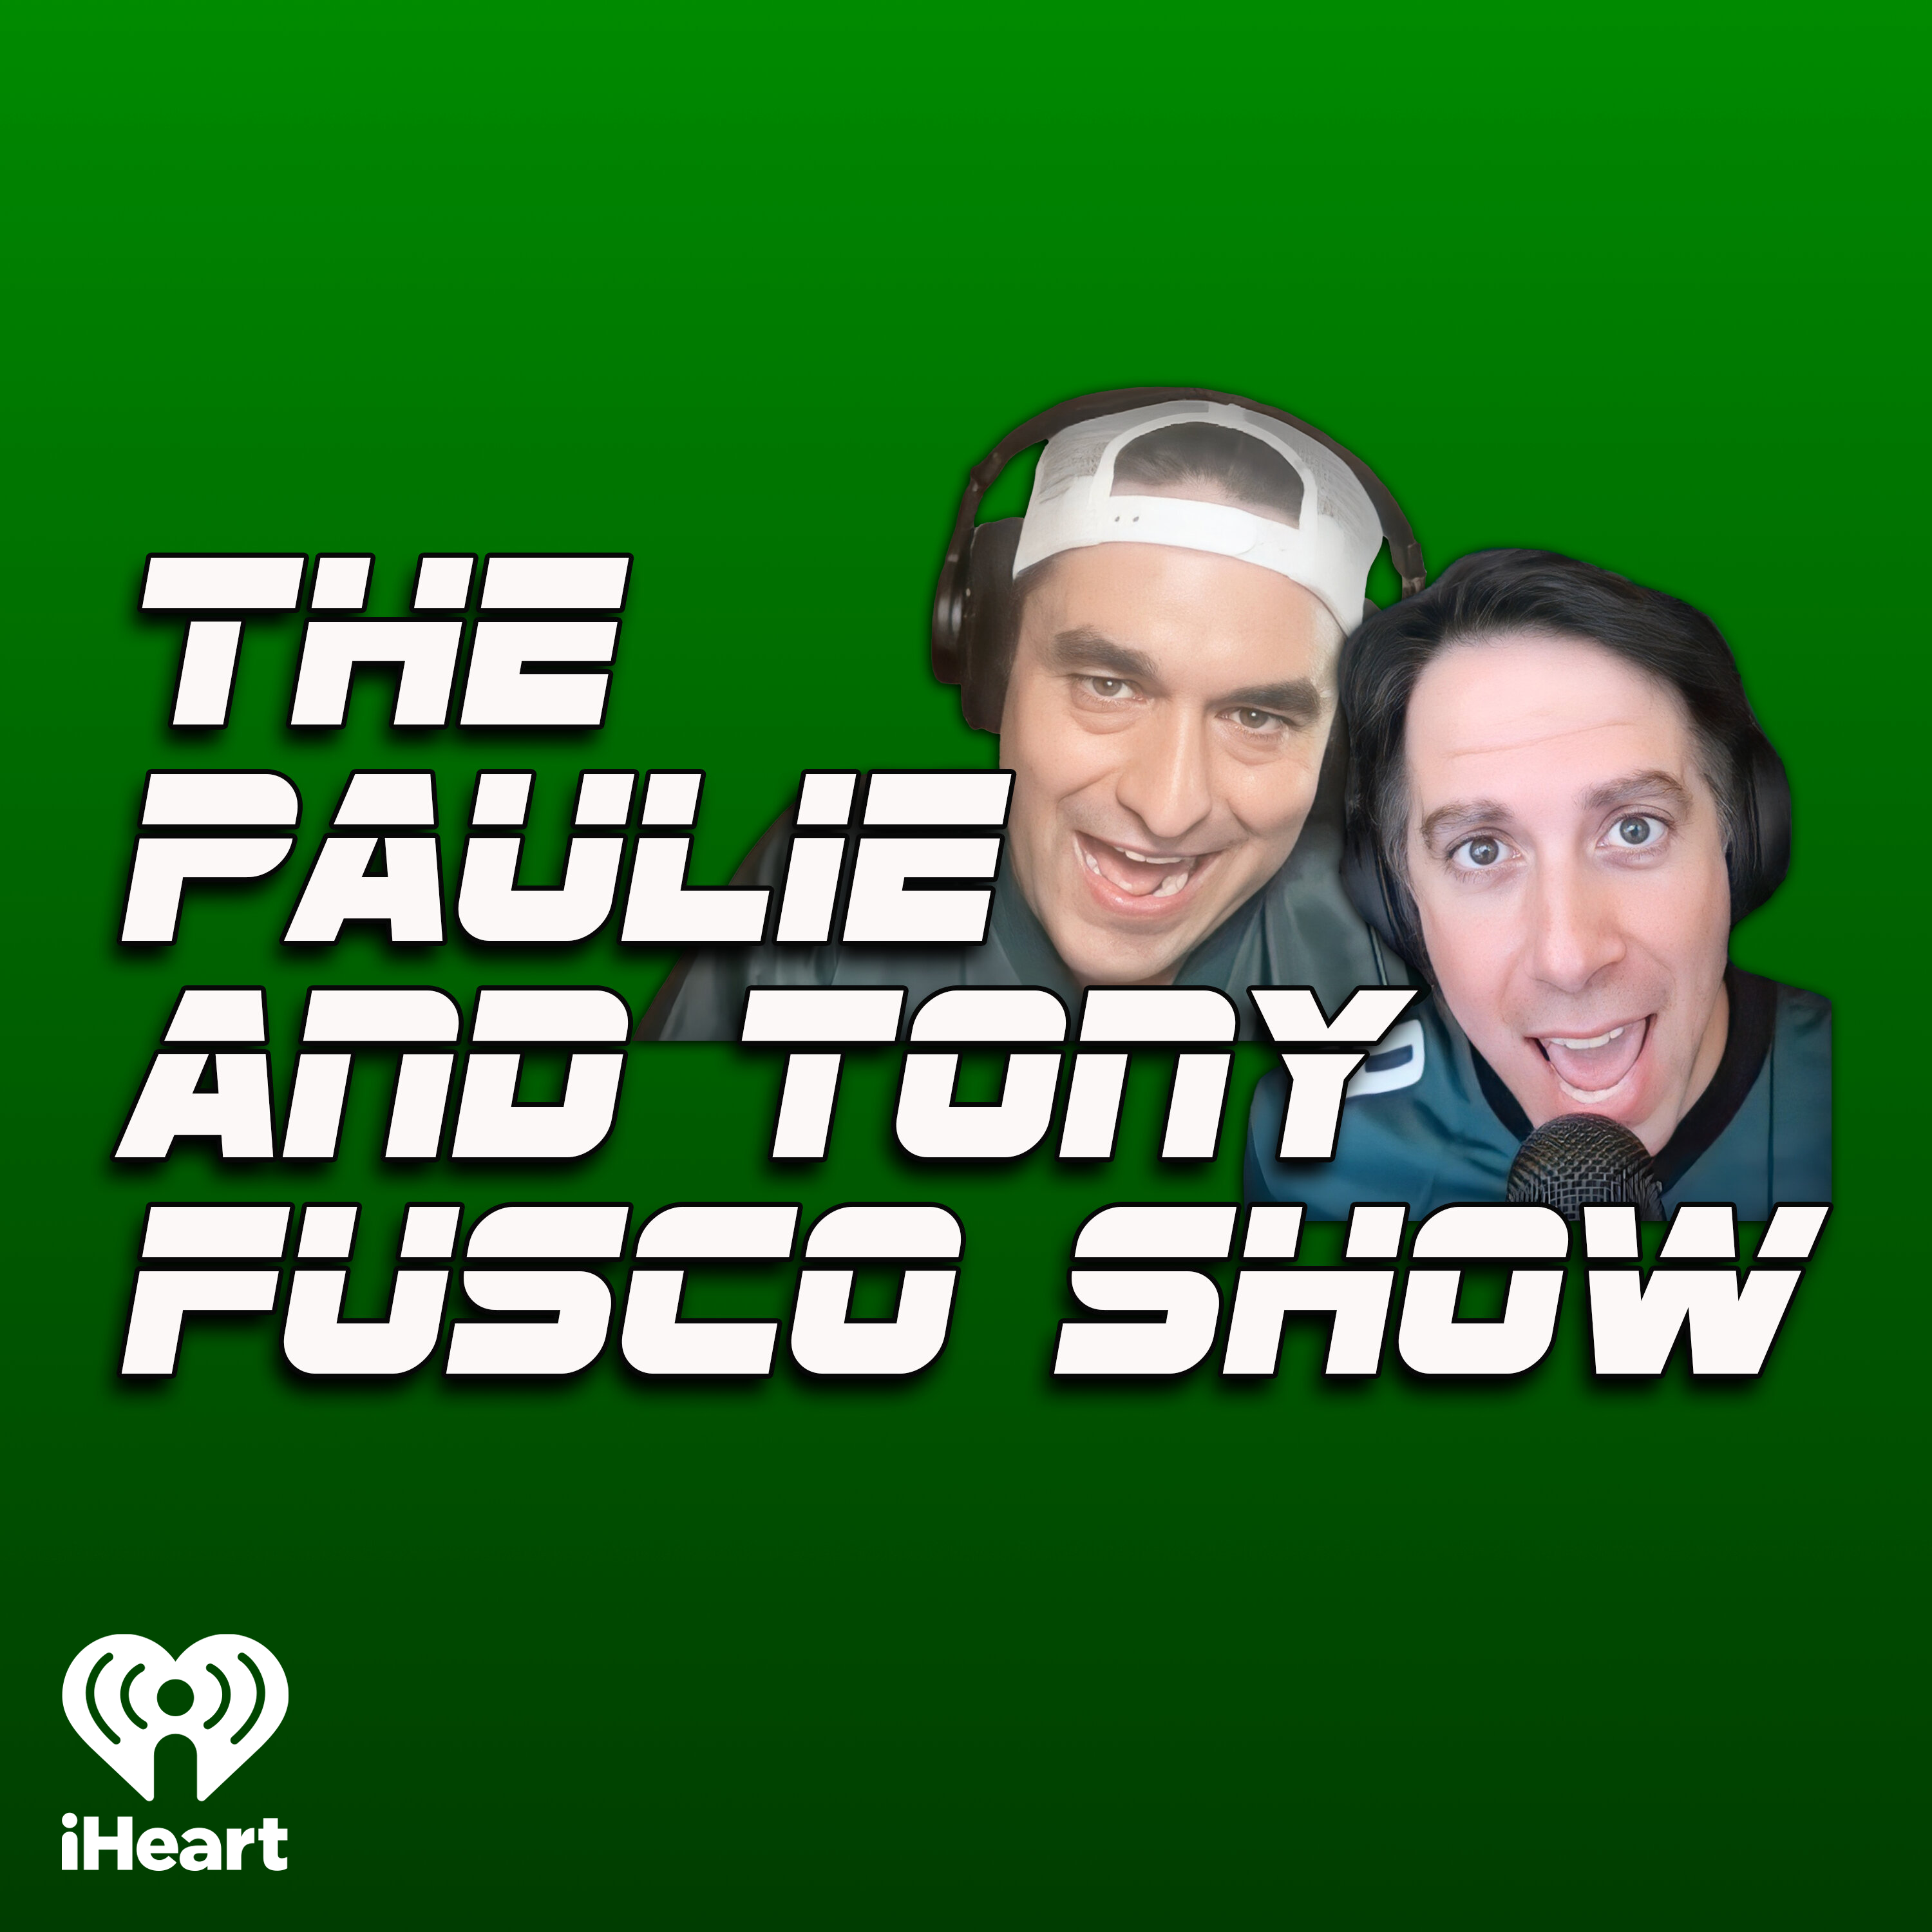 The Paulie & Tony Fusco Show: "Overwatergate", the new Super Bowl scandal